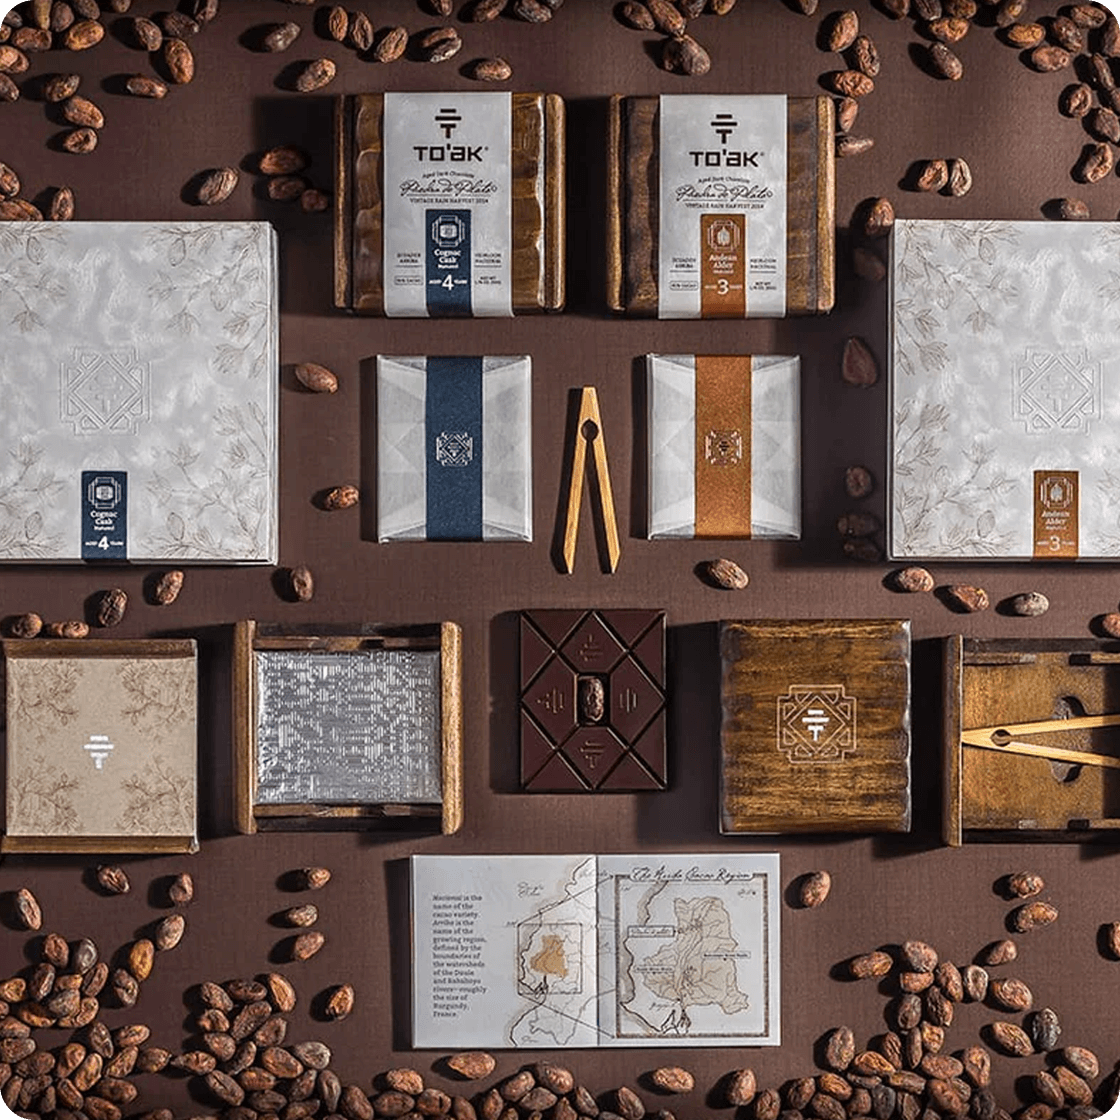 How To’ak Chocolate increased email-generated revenue by 460%